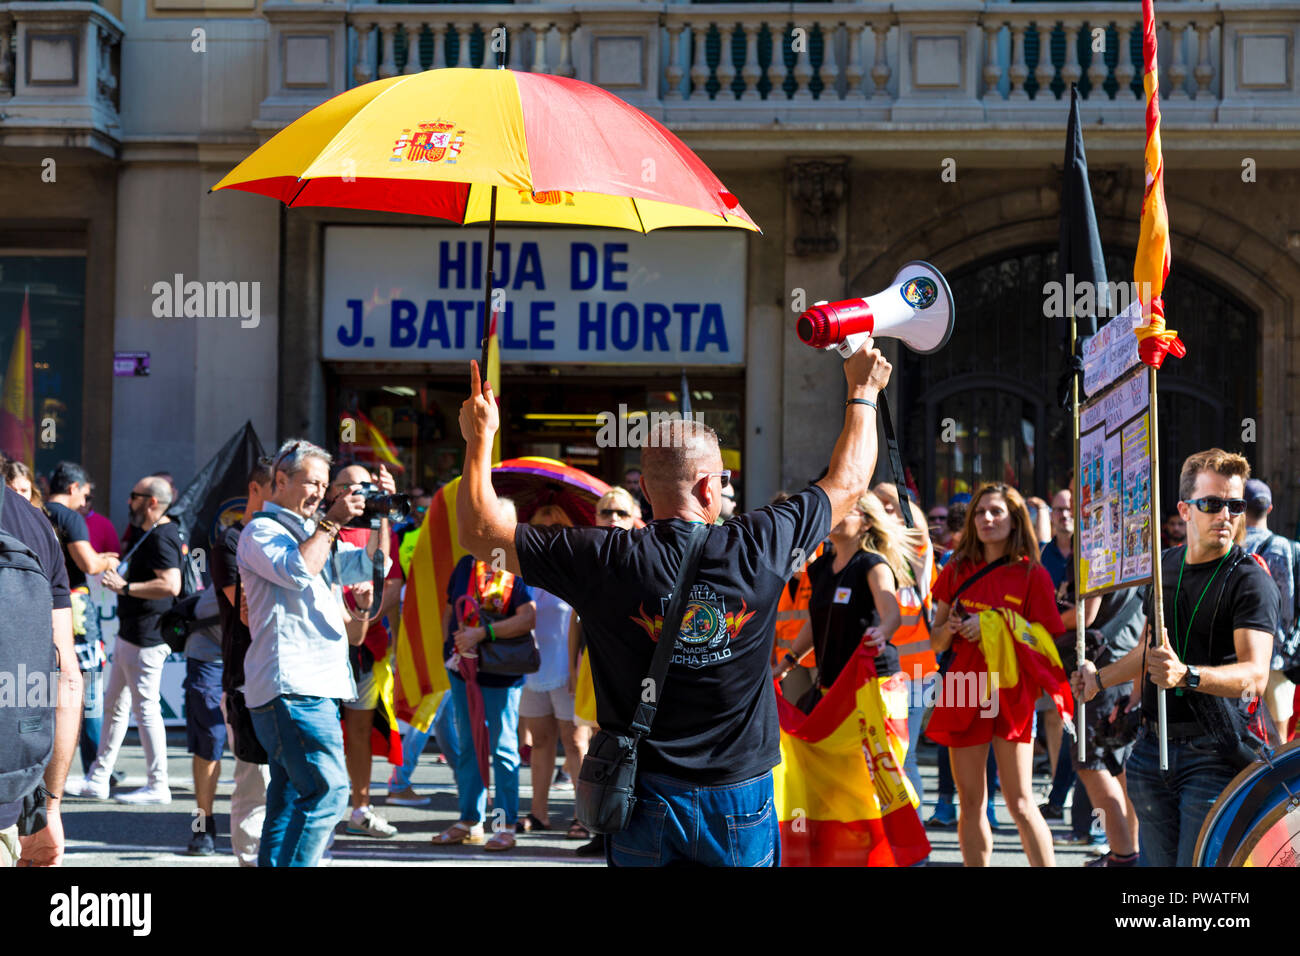 29th September 2018, Barcelona, Spain - Catalan pro-independence separatists protesting in the city centre Stock Photo